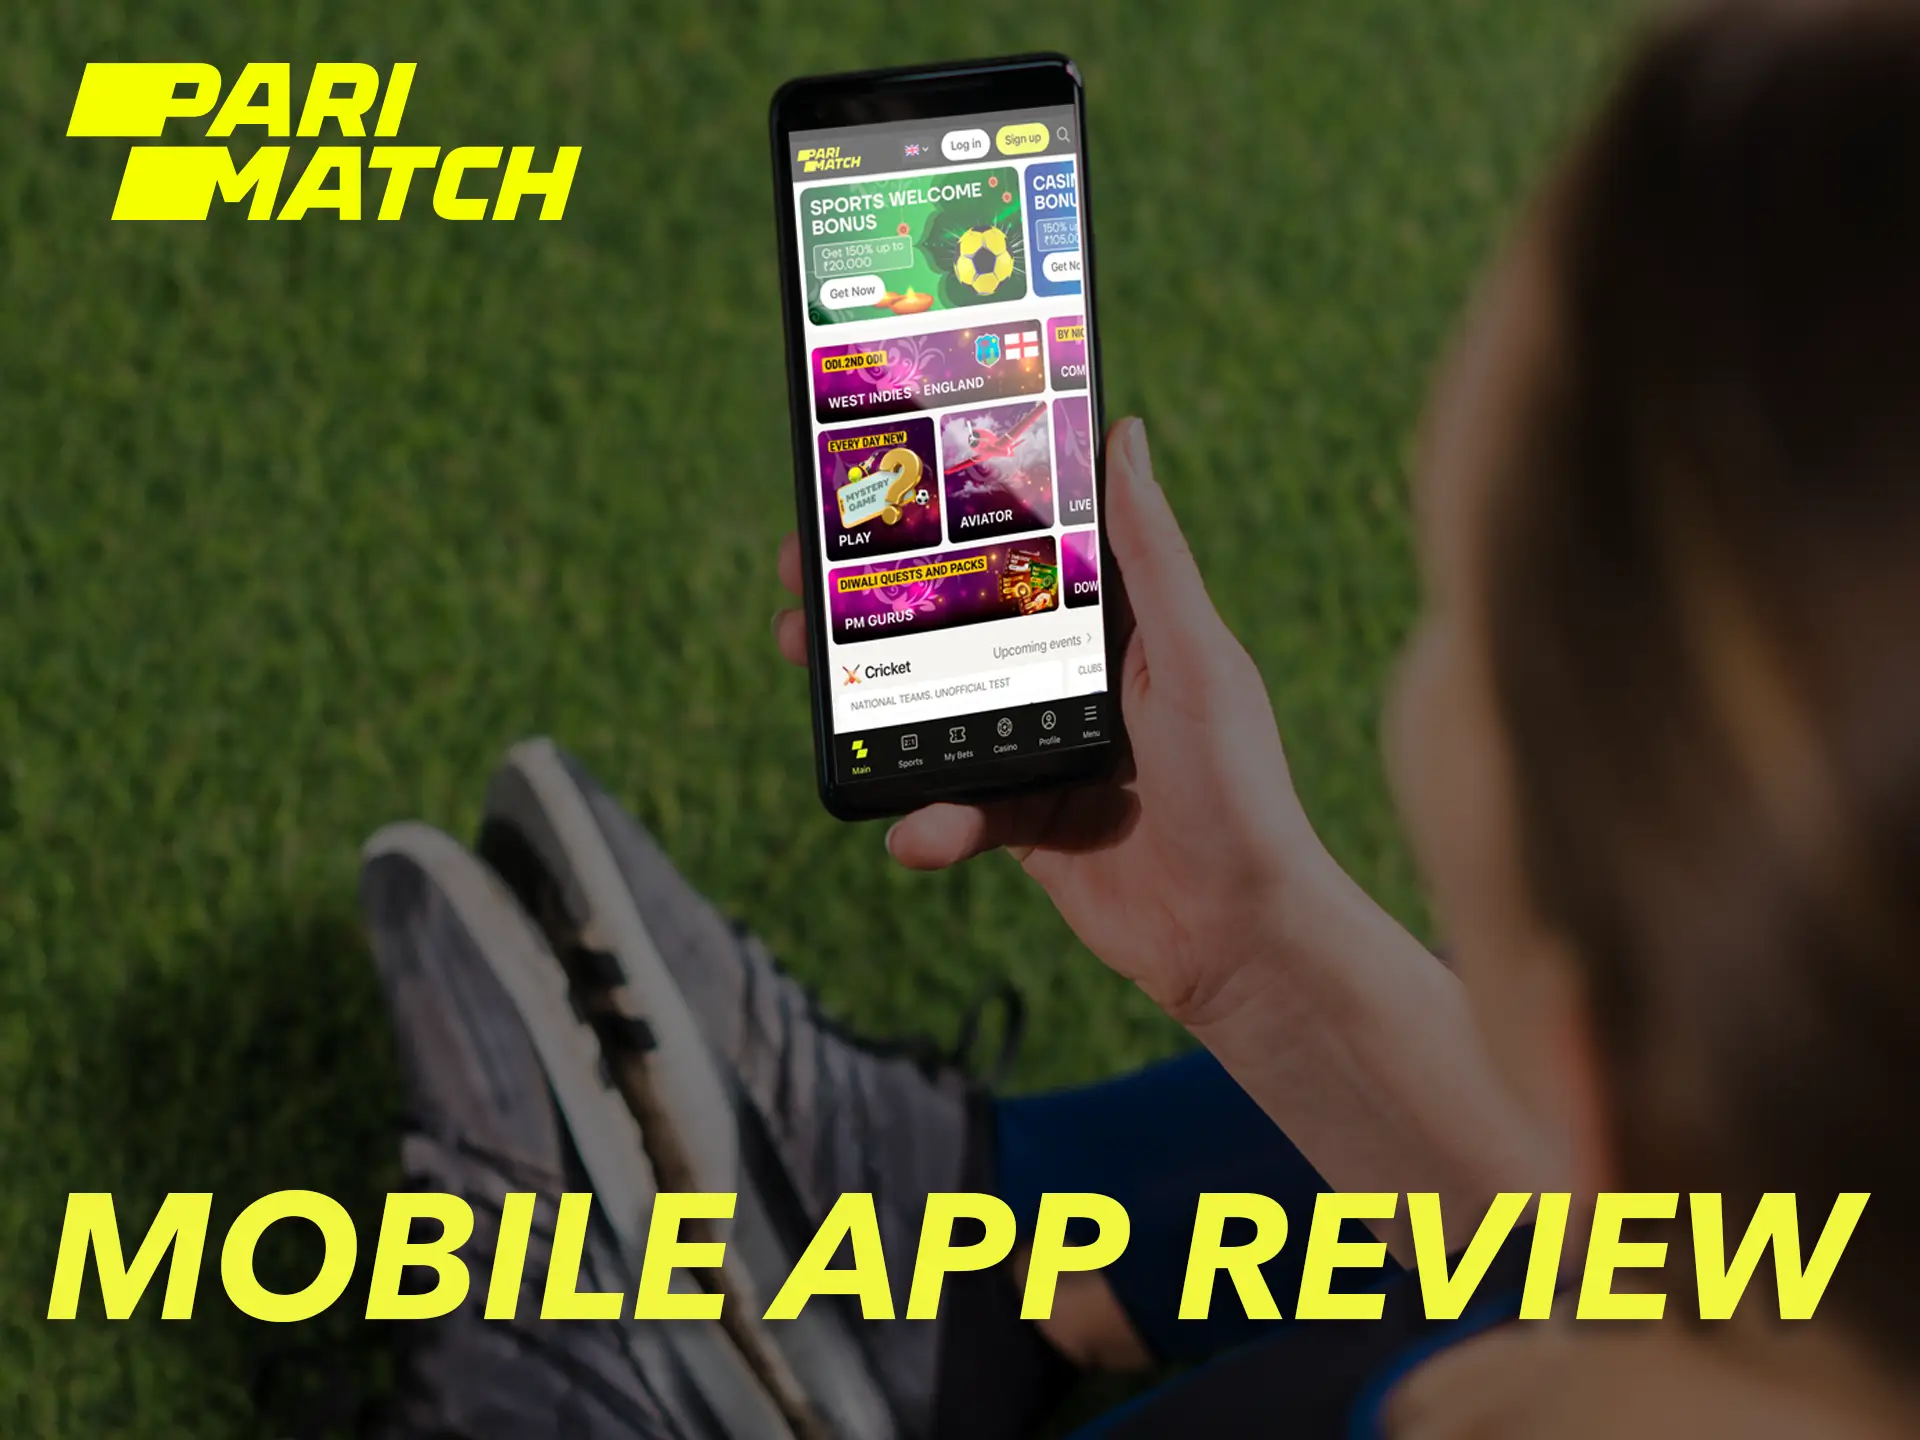 Play and place your bets at Parimatch wherever you are with your cell phone.